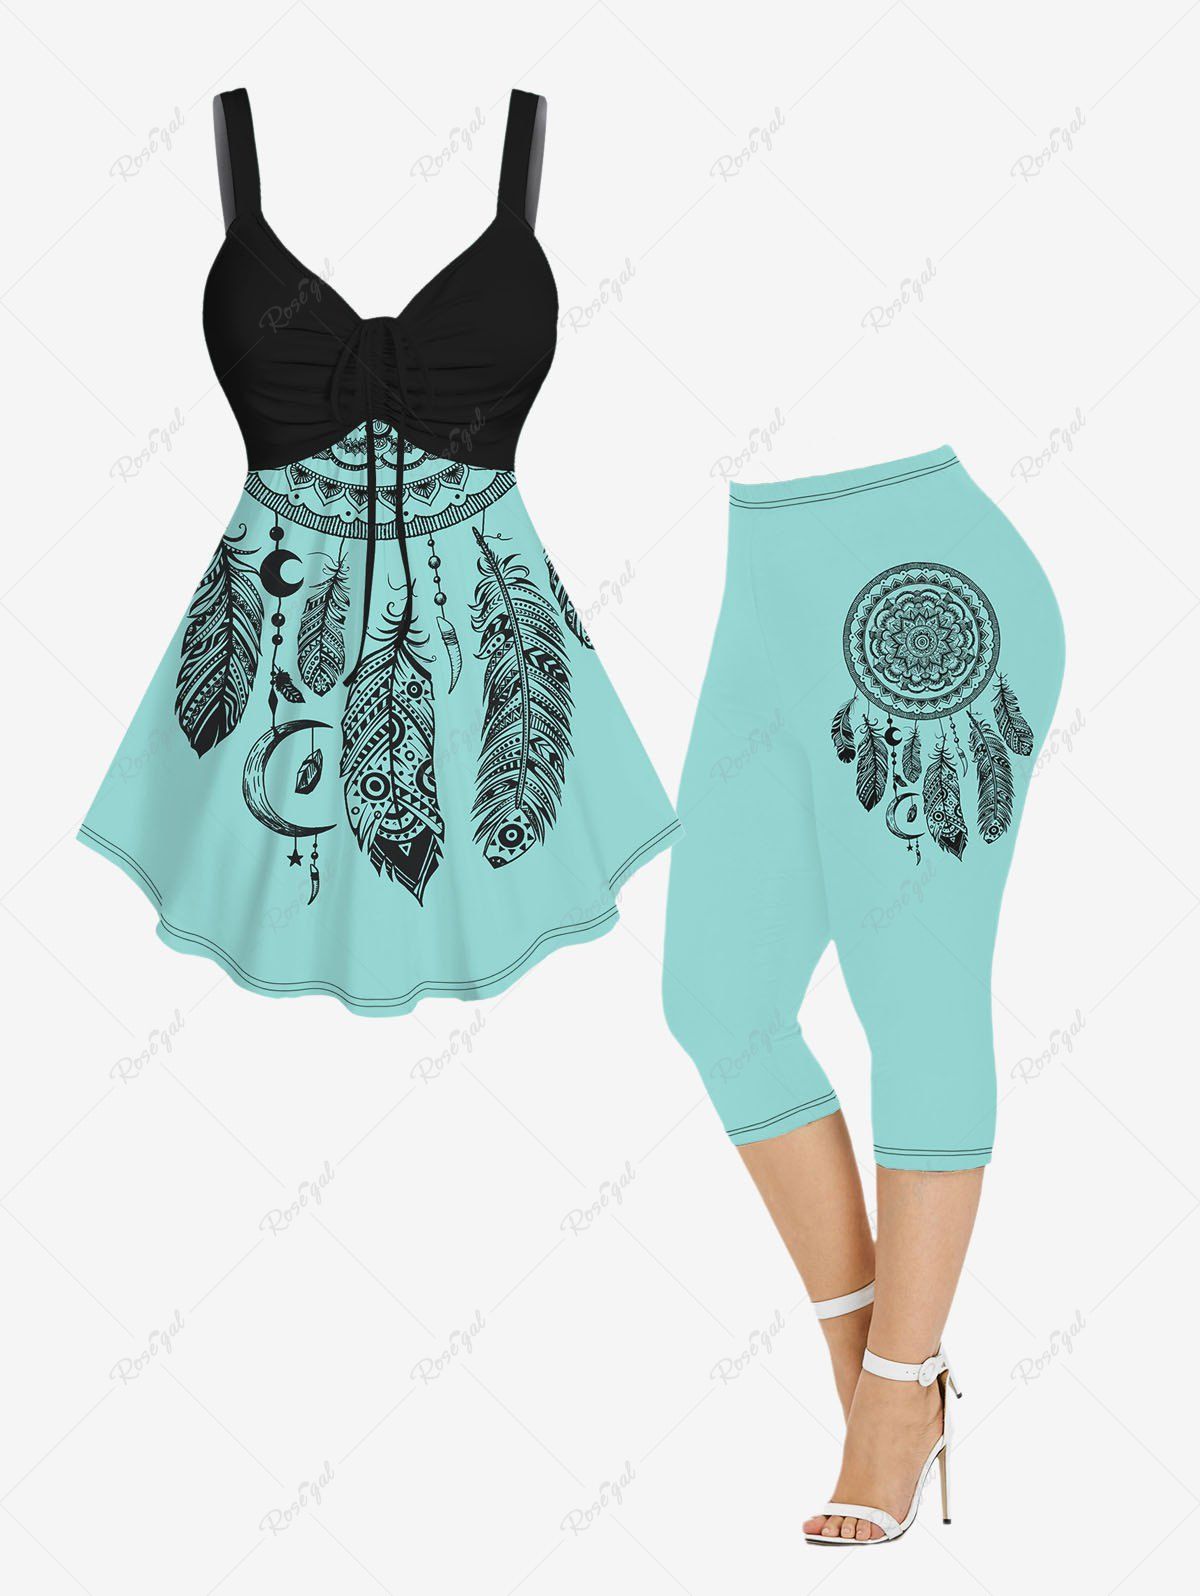 Affordable Feather Moon Dreamcatcher Printed Cinched Tank Top and Capri Leggings Plus Size Outfit  